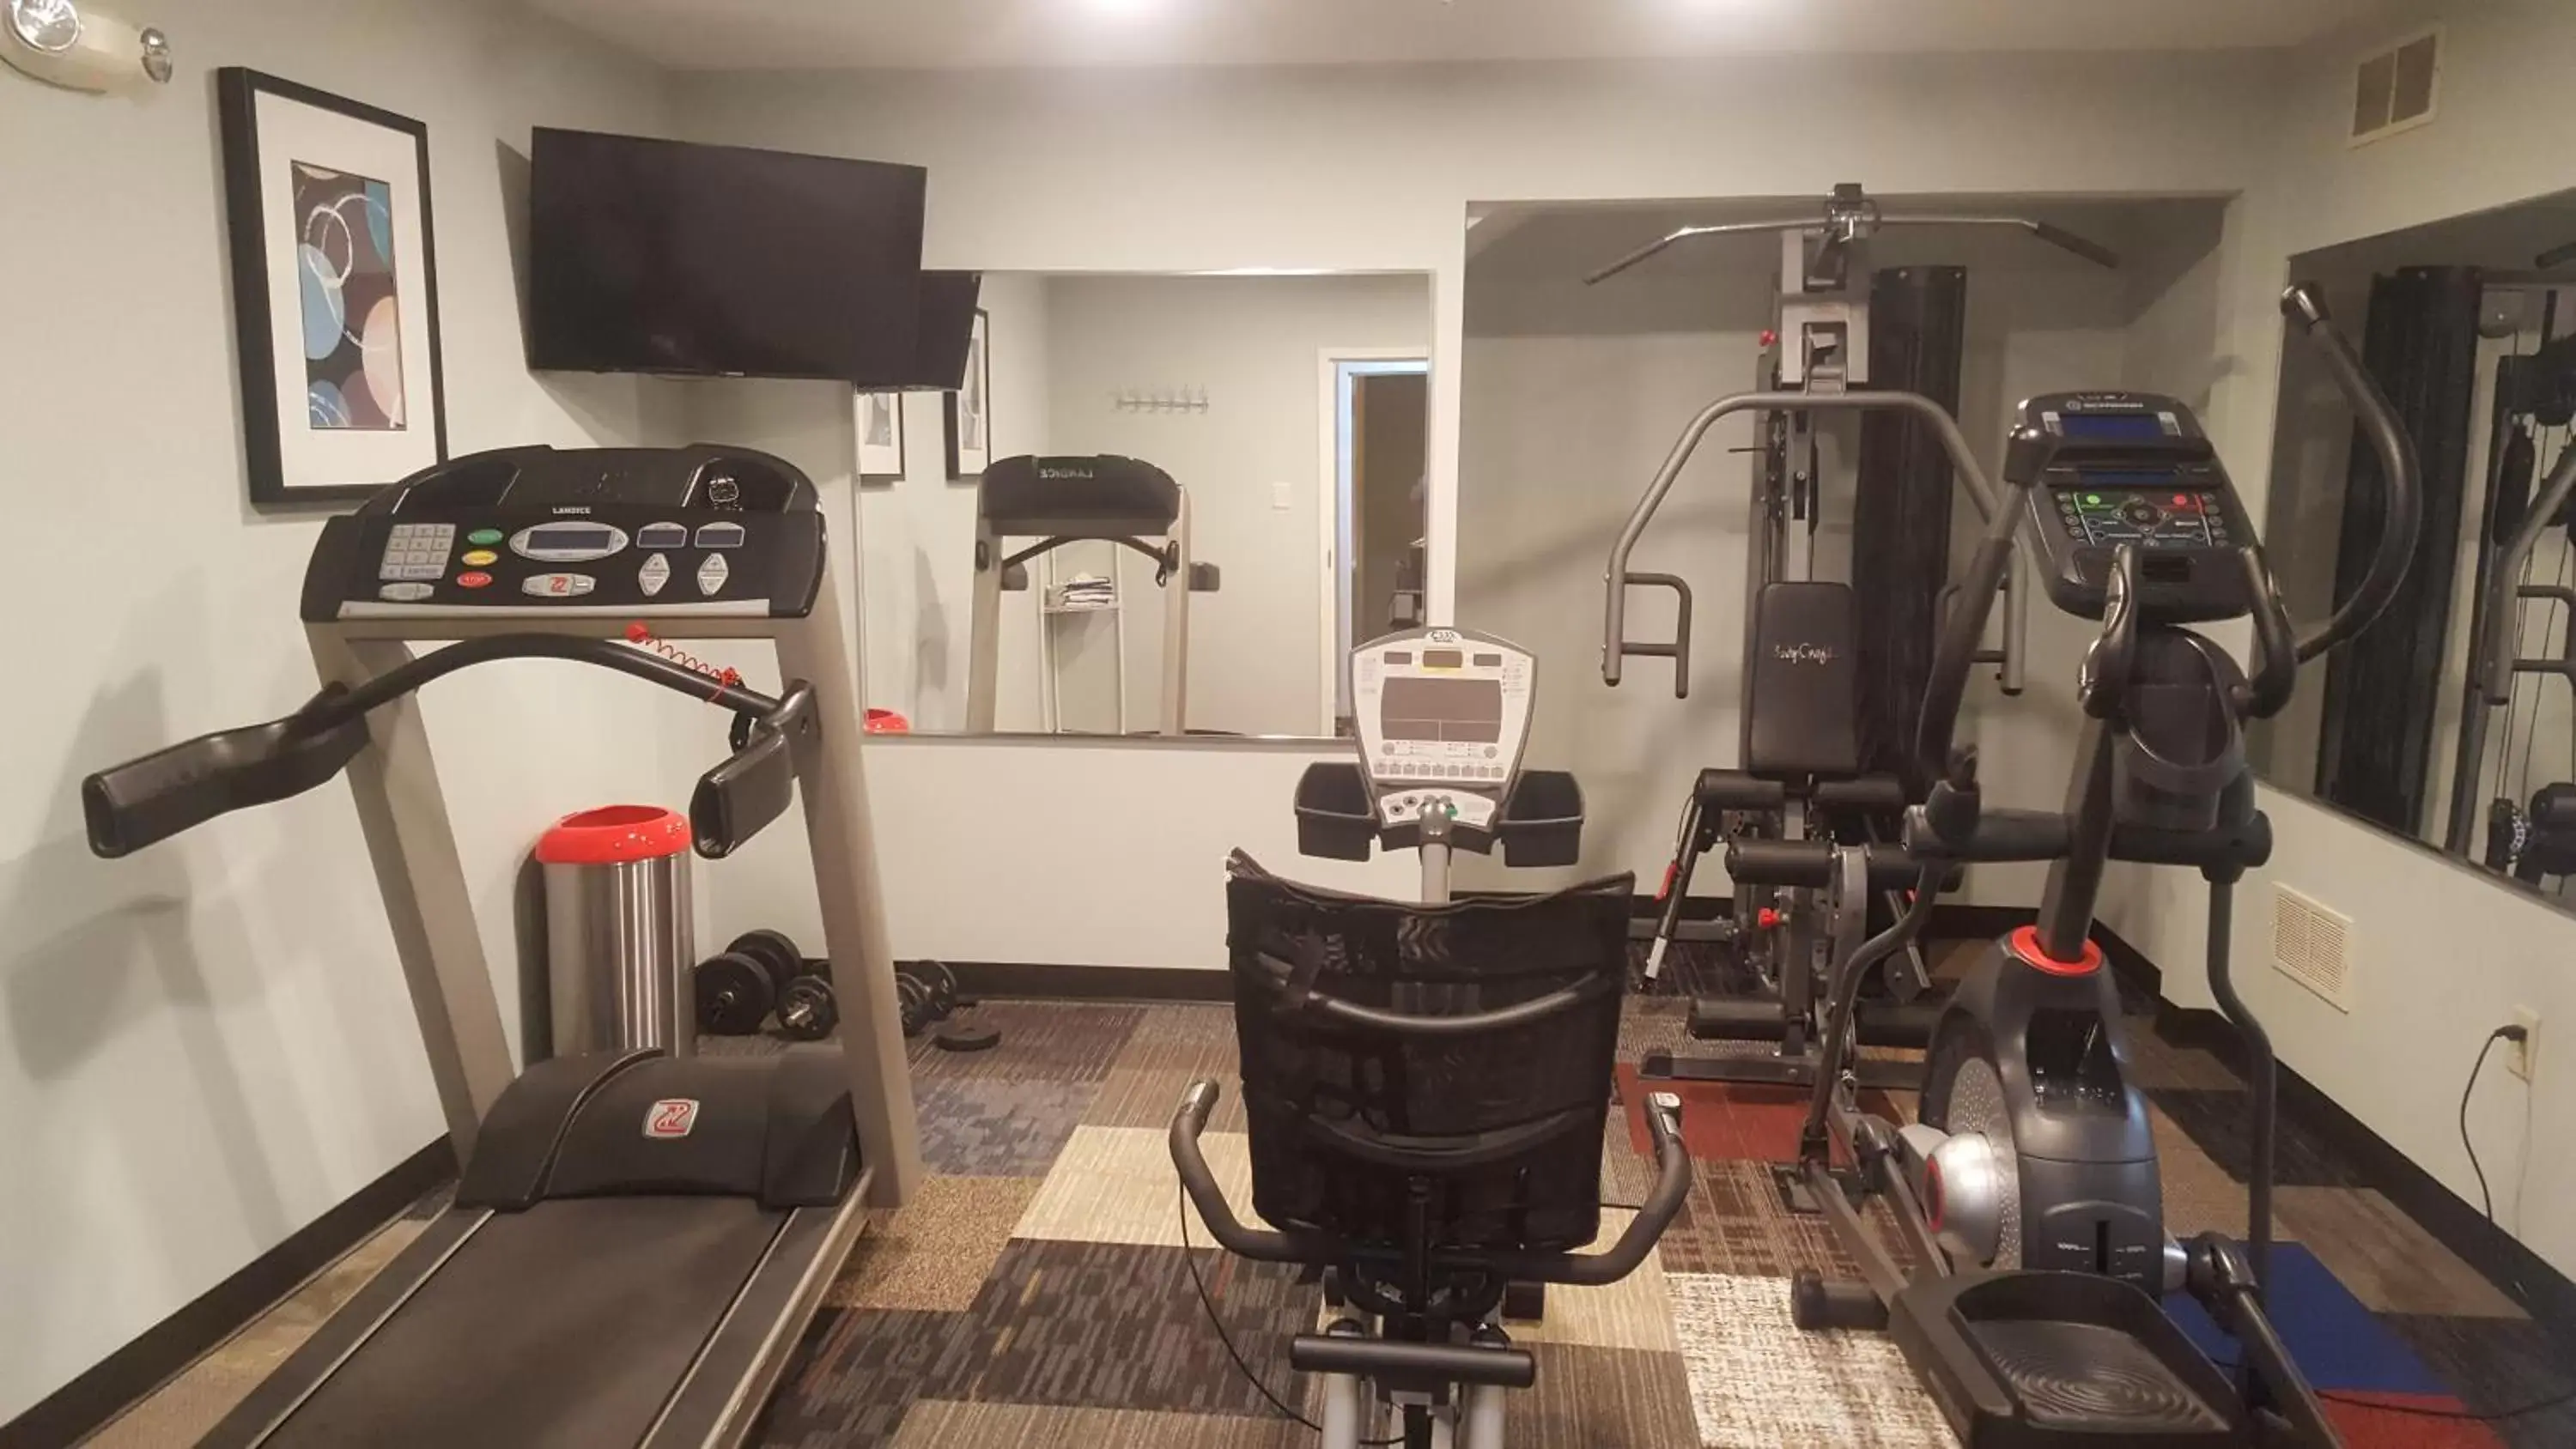 Fitness centre/facilities, Fitness Center/Facilities in Ashley Quarters Hotel